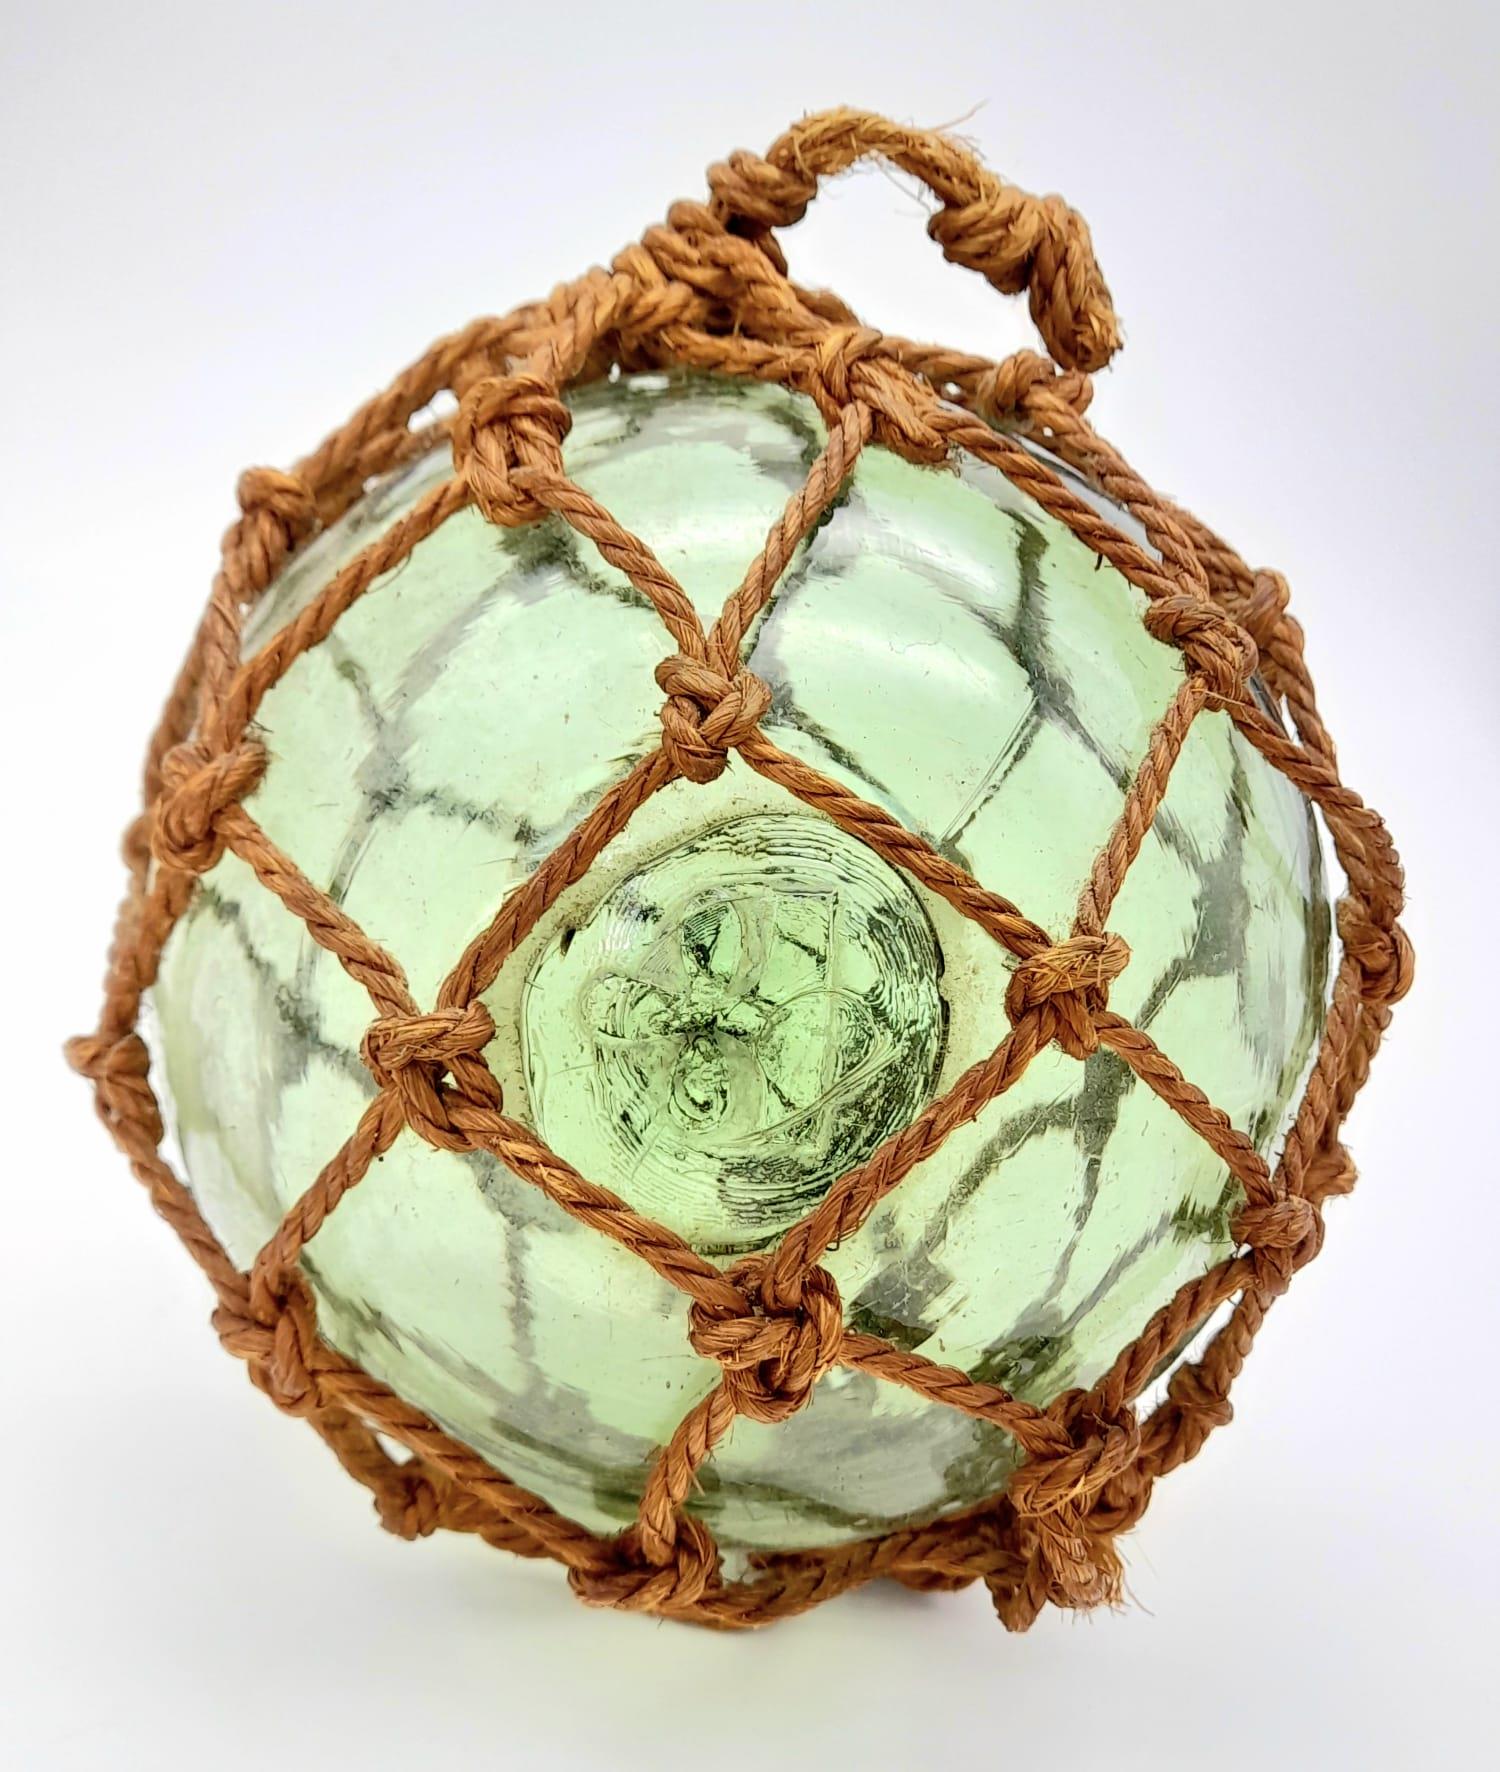 An Antique Japanese Glass Fishing Float with a Lovely Pontil Mark and Netting.